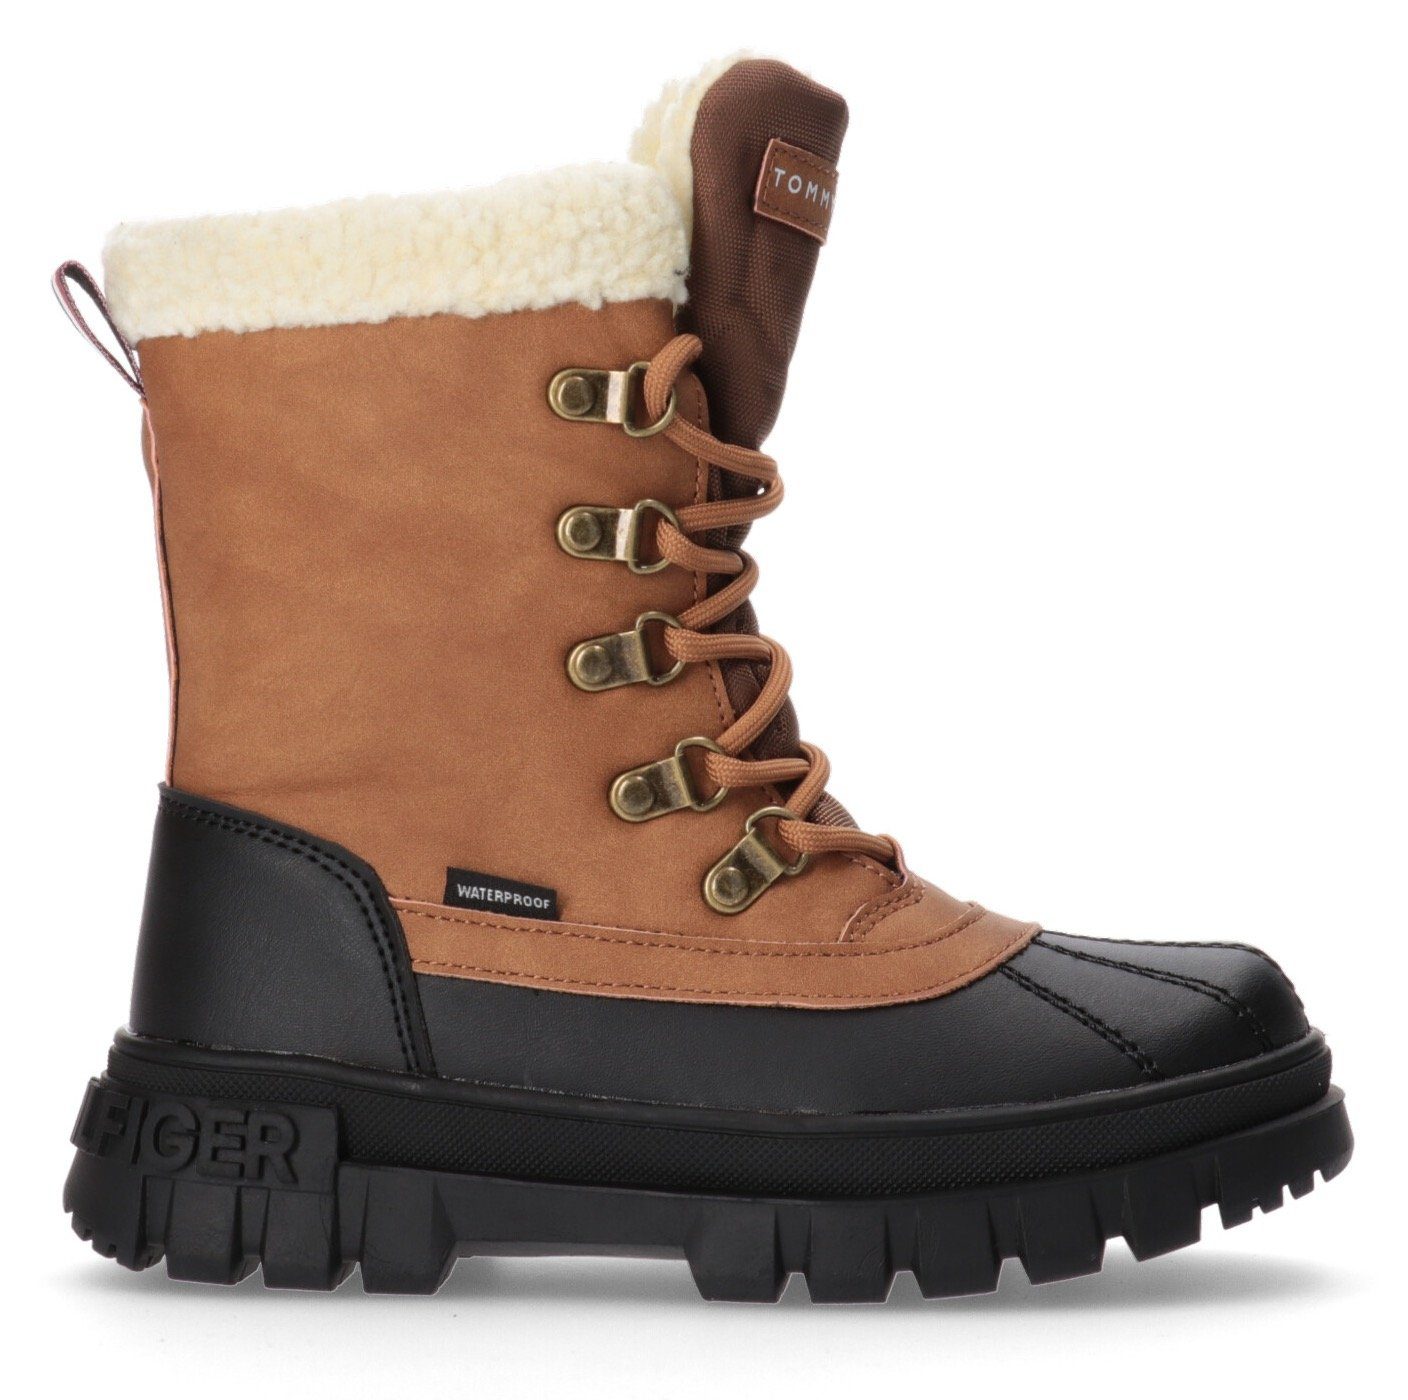 Tommy Hilfiger Thermostiefel LACE-UP Snowboots BOOT mit Warmfutter